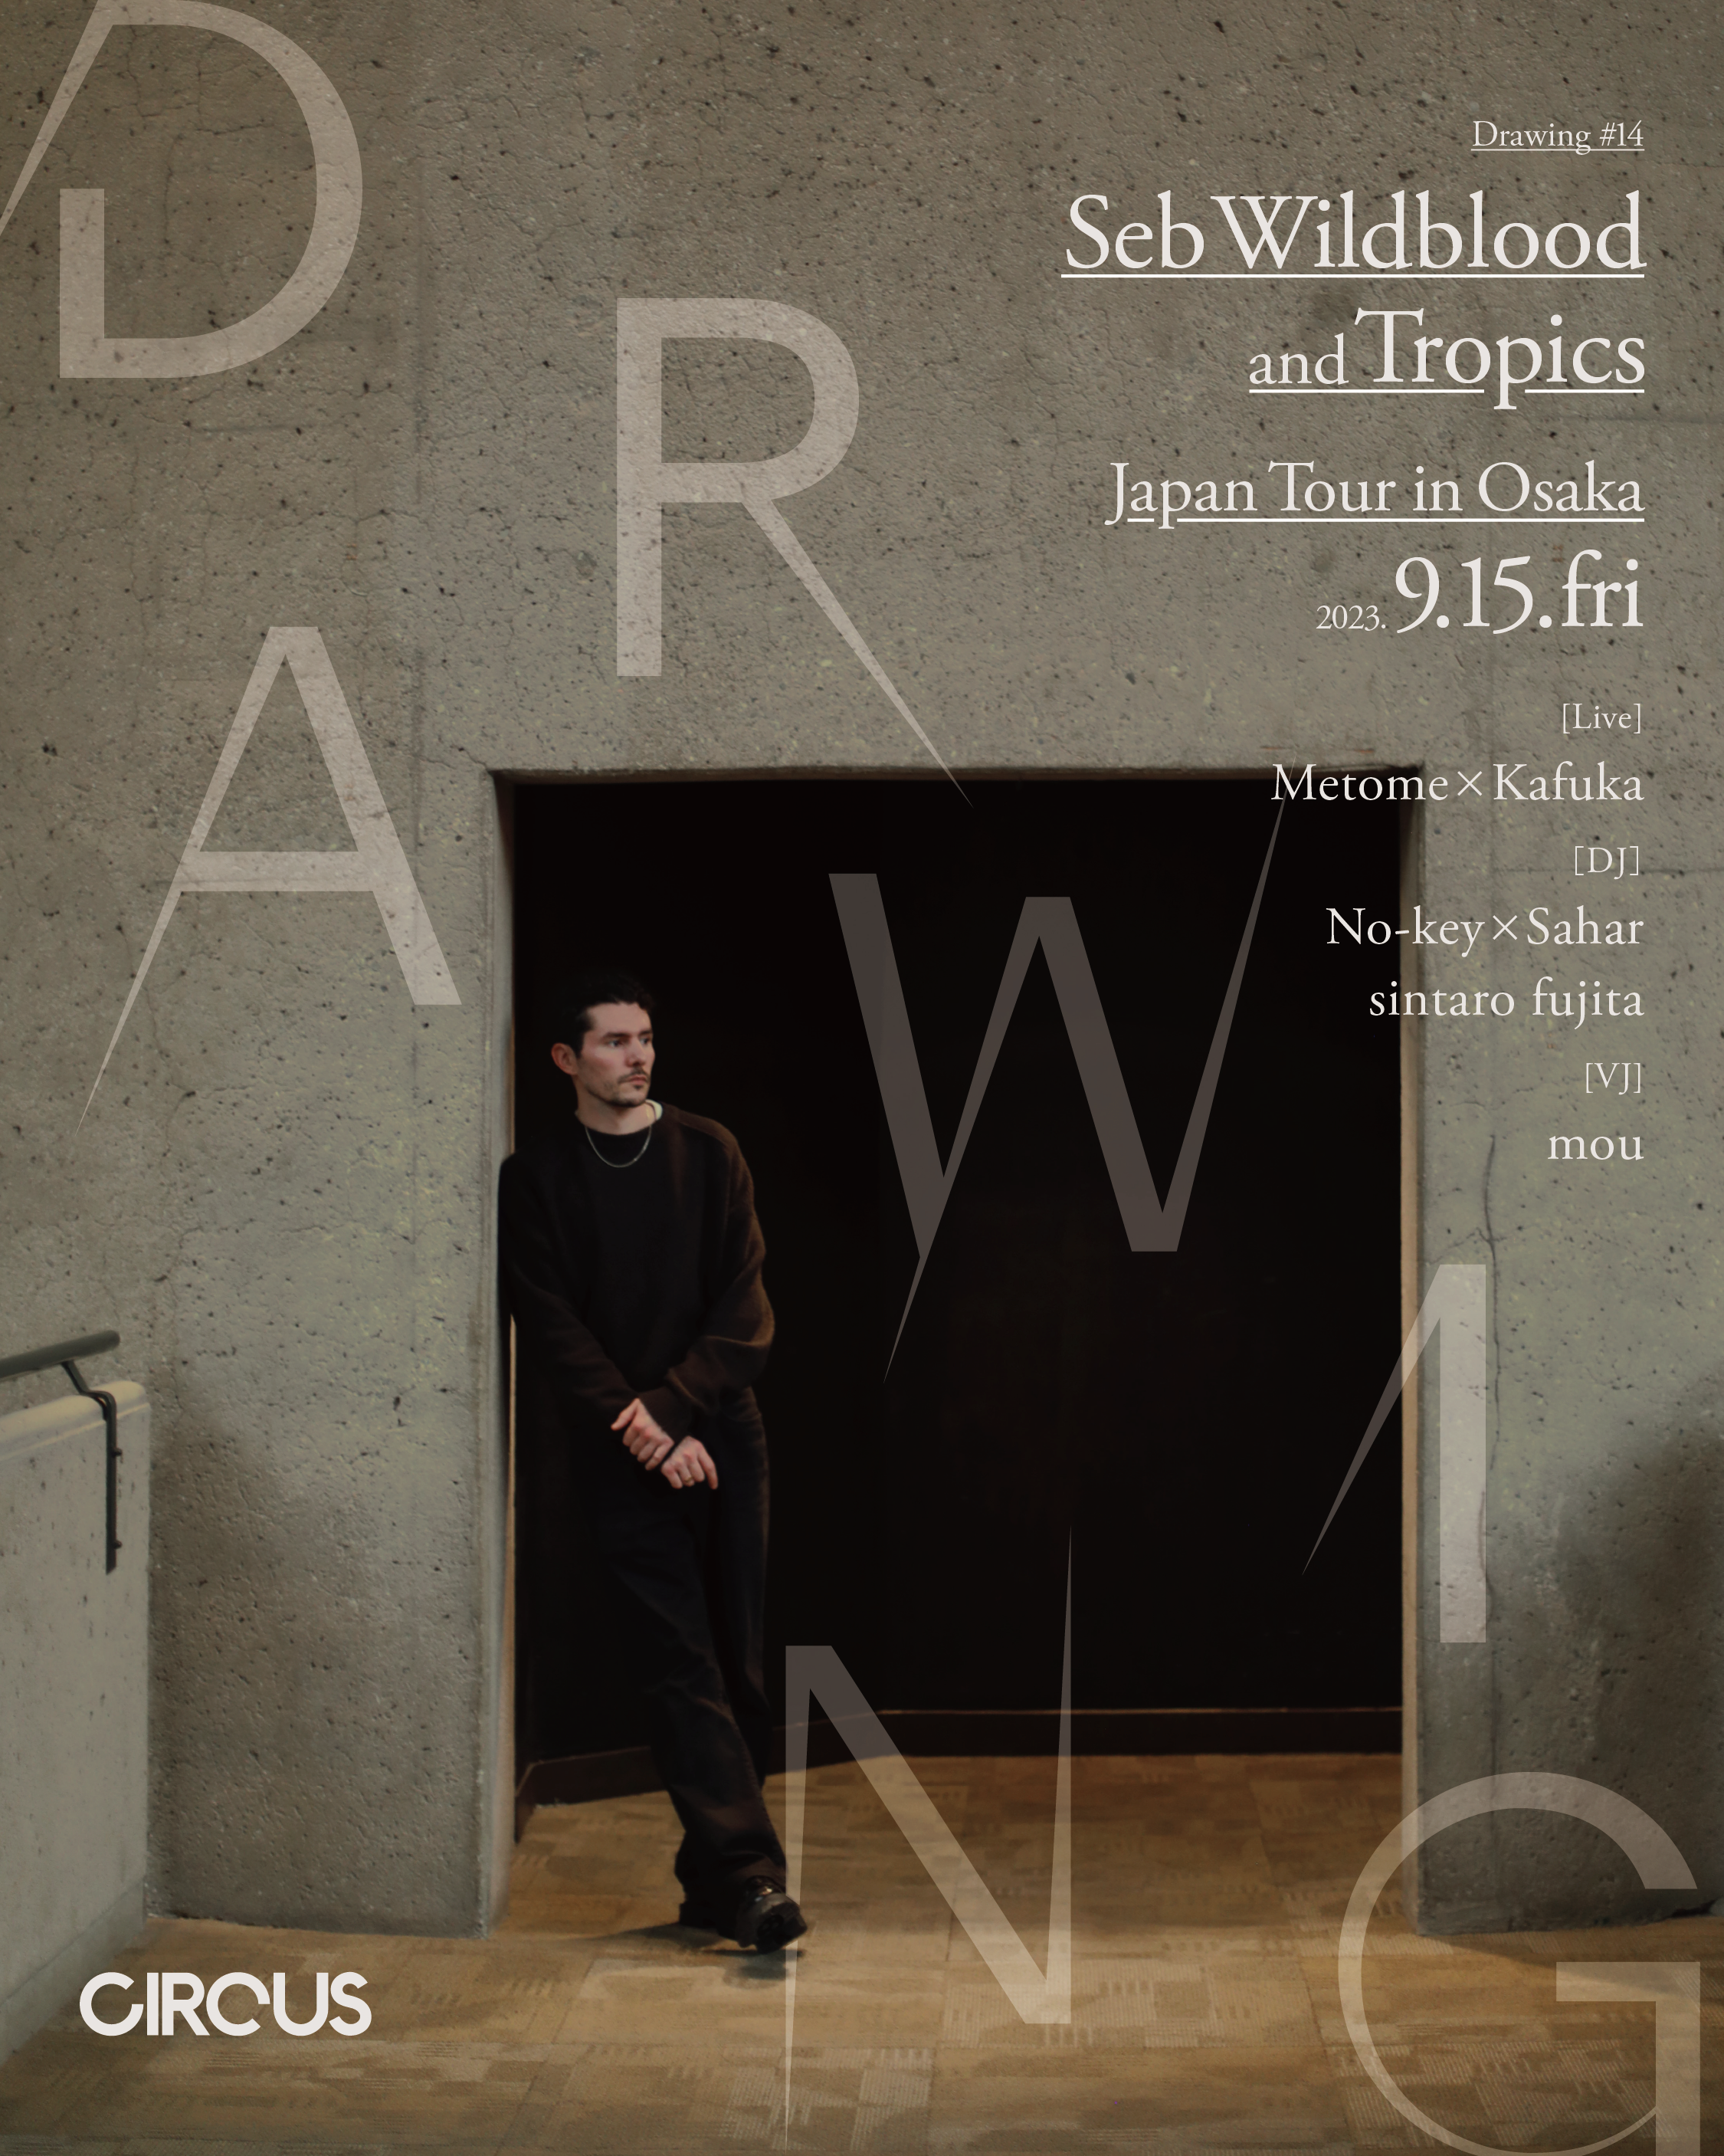 Seb Wildblood and Tropics Japan Tour in Osaka Supported by drawing - Página trasera